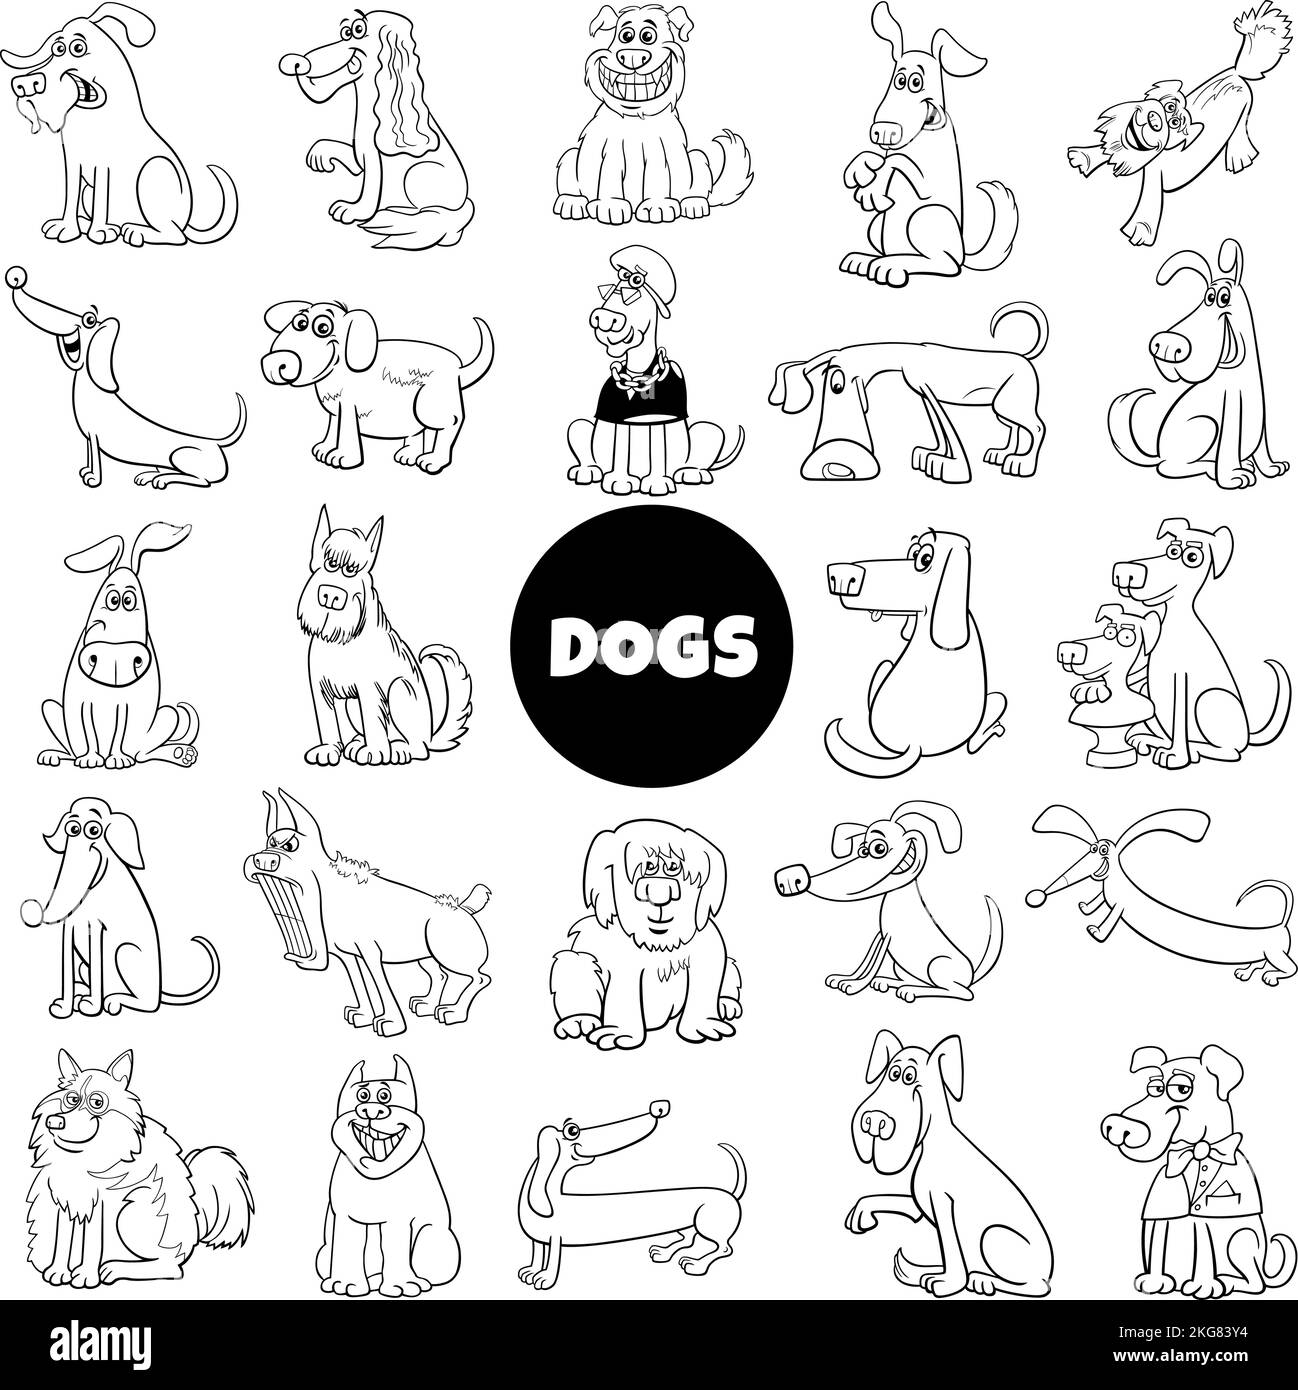 Black and white cartoon illustration of dogs and puppies animal comic characters big set Stock Vector